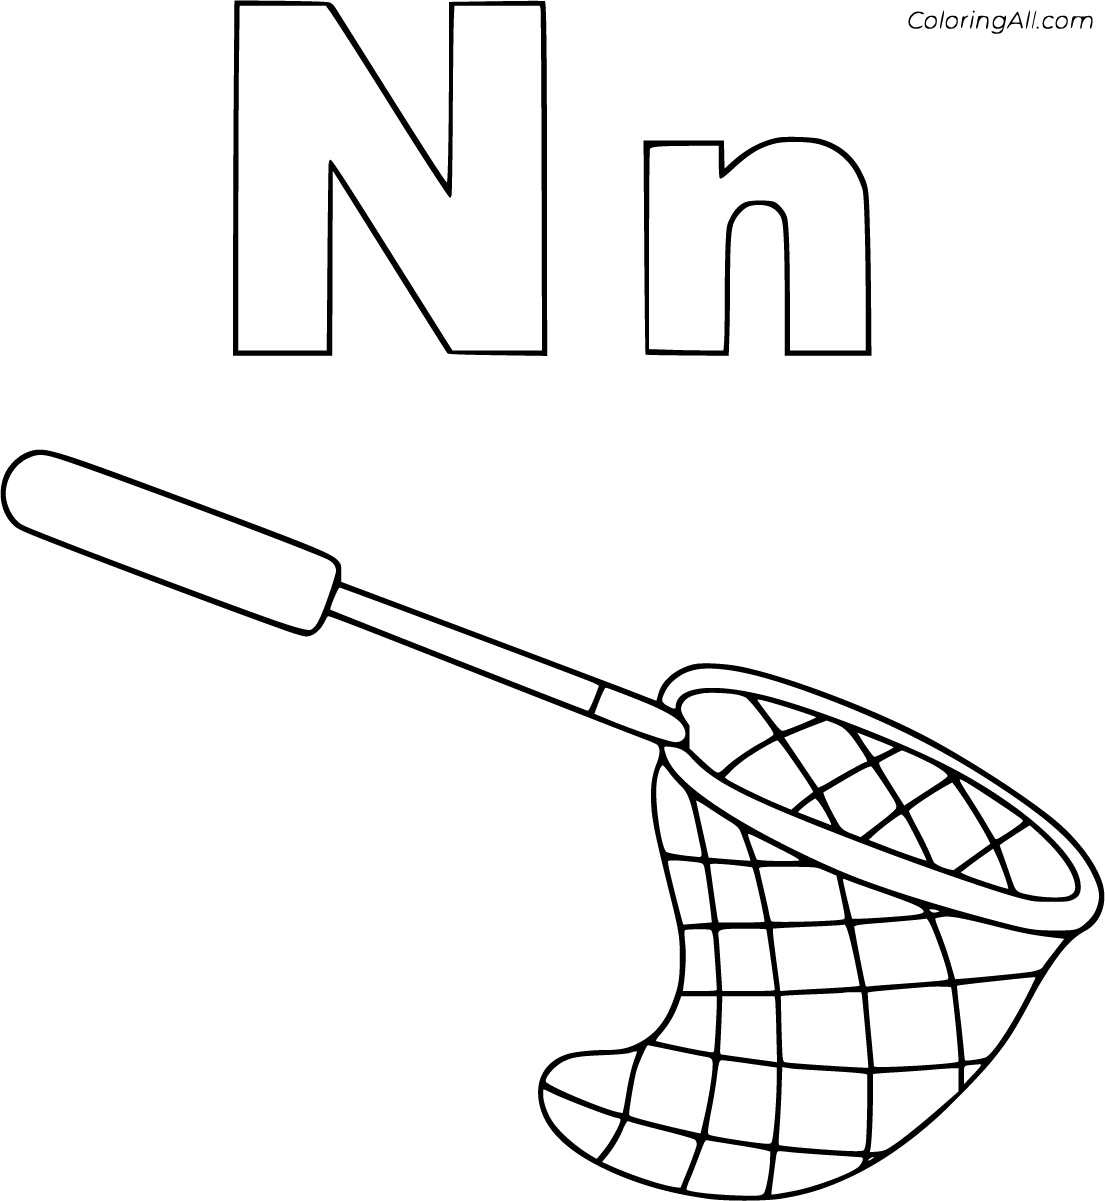 Download Letter N Coloring Pages - ColoringAll